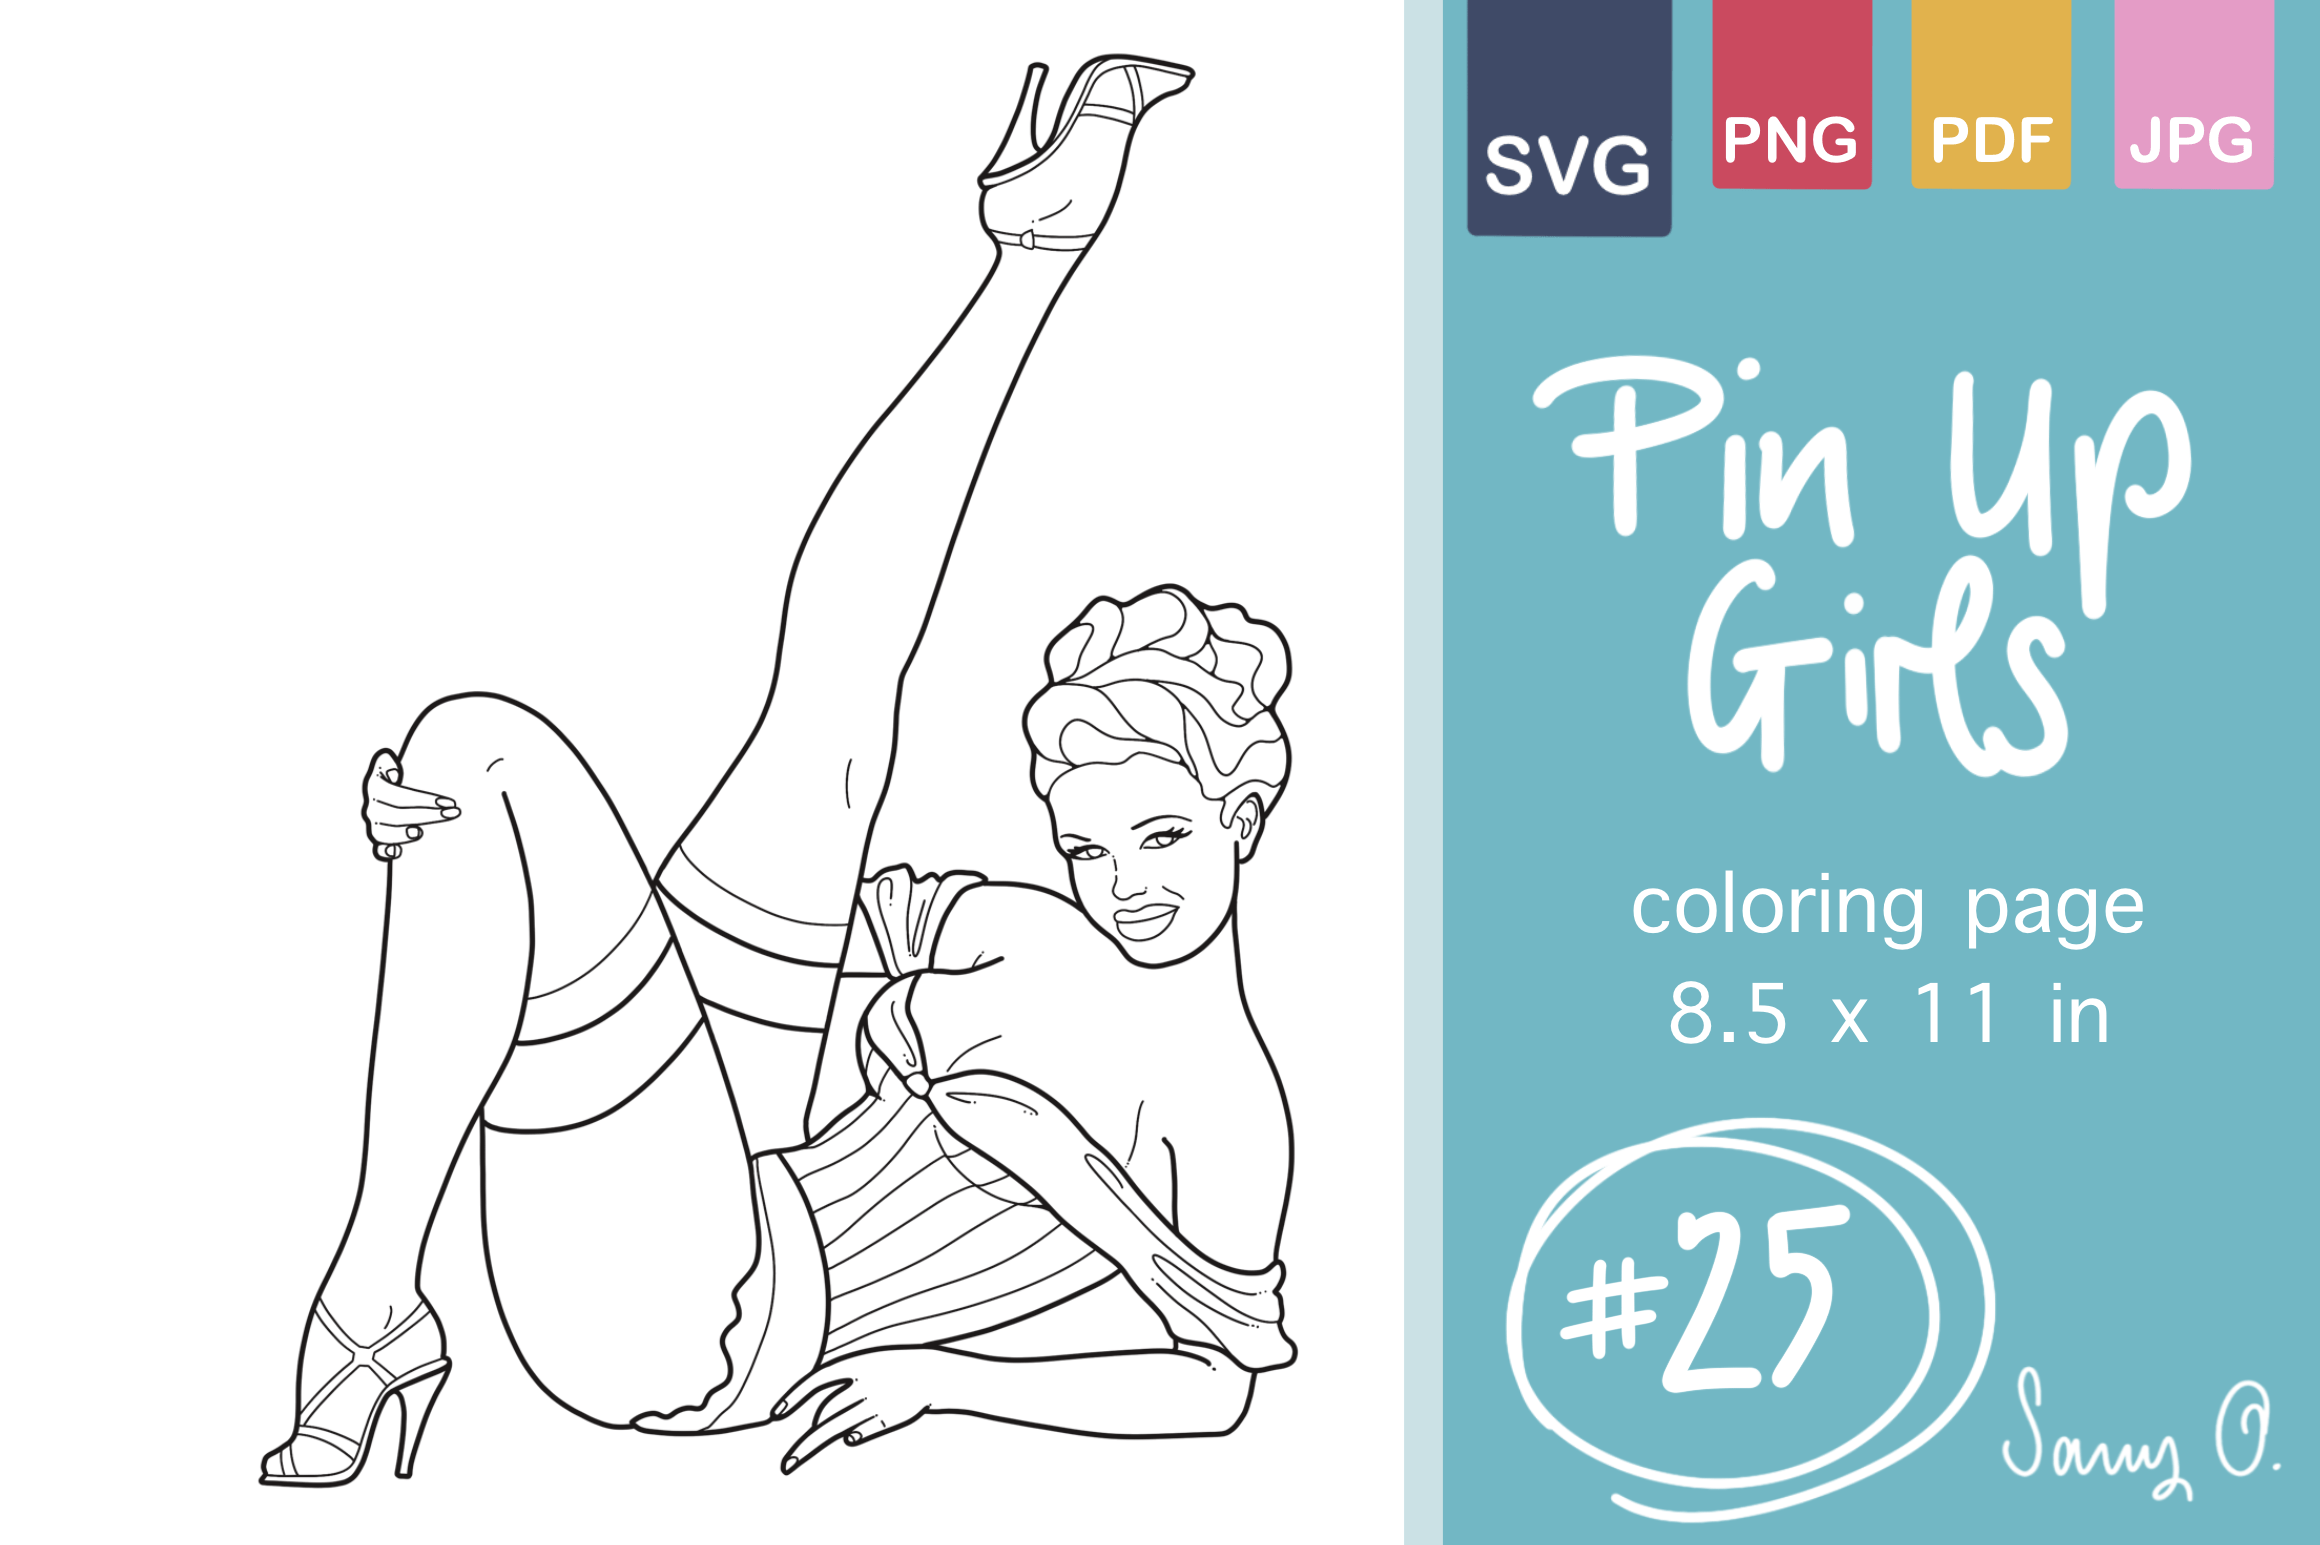 Vintage Pin Up Girls Coloring Clip Art Graphic By Sany O · Creative Fabrica